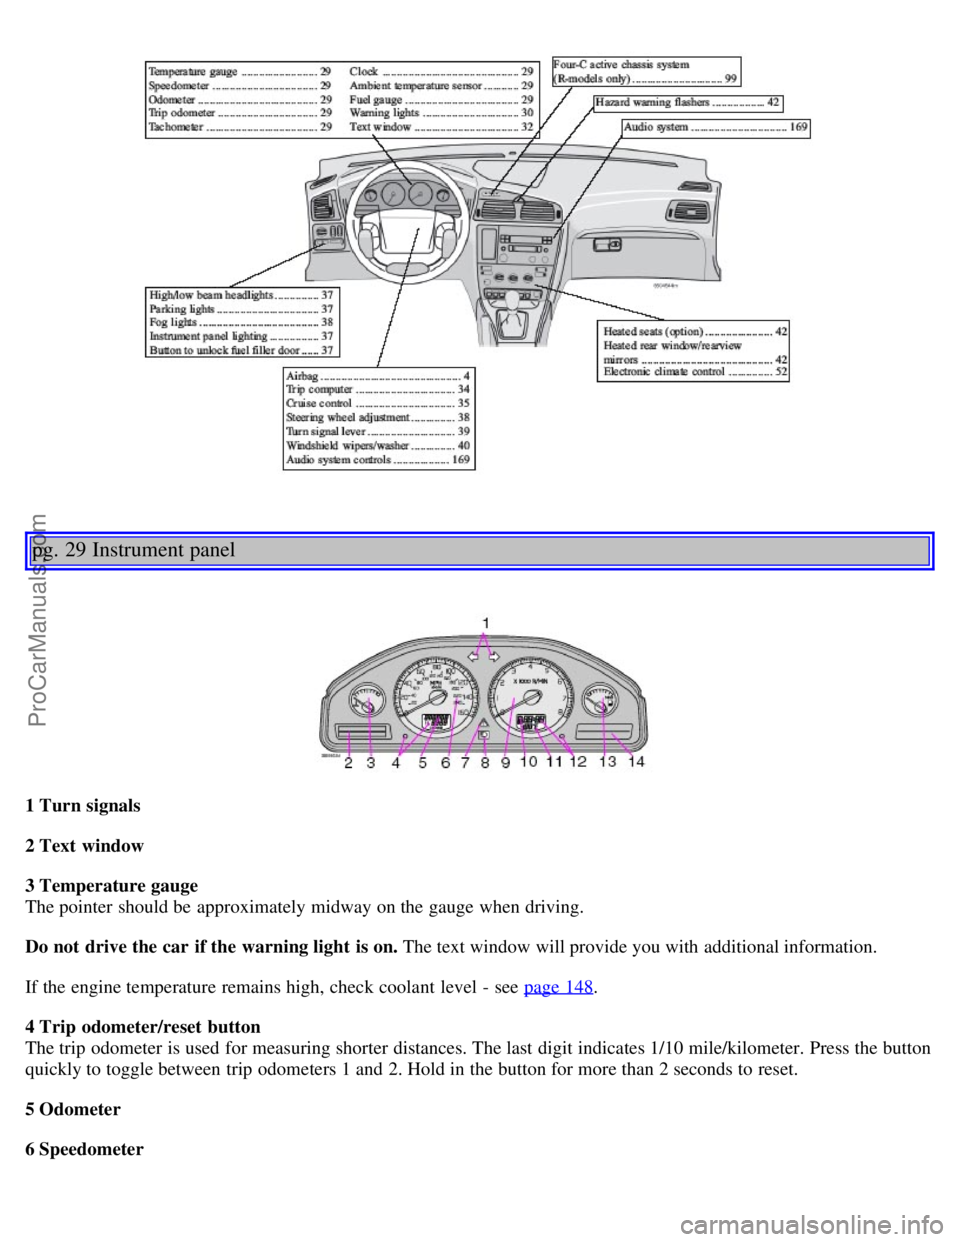 VOLVO V70 2005  Owners Manual pg. 29 Instrument panel
1 Turn signals
2 Text  window
3 Temperature gauge
The pointer should be  approximately midway on the gauge when driving.
Do not drive the car if the warning light  is on. The t